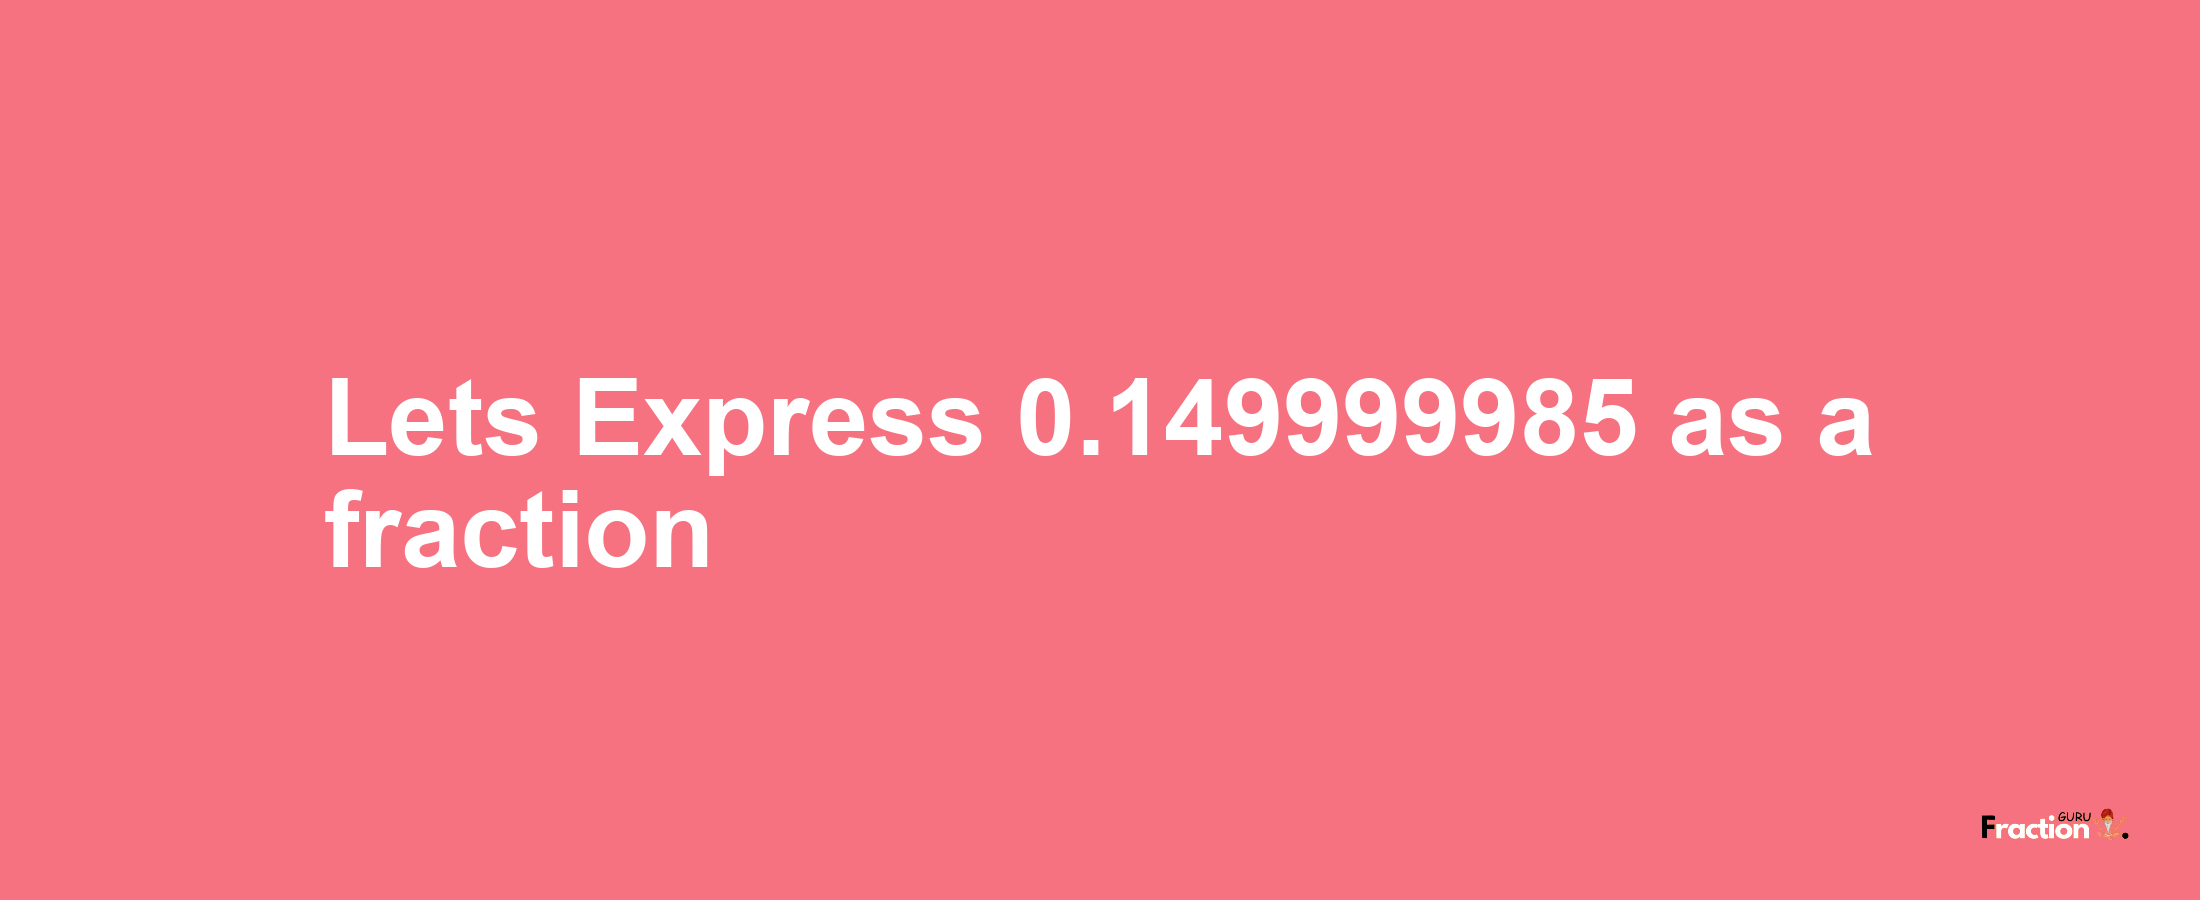 Lets Express 0.149999985 as afraction